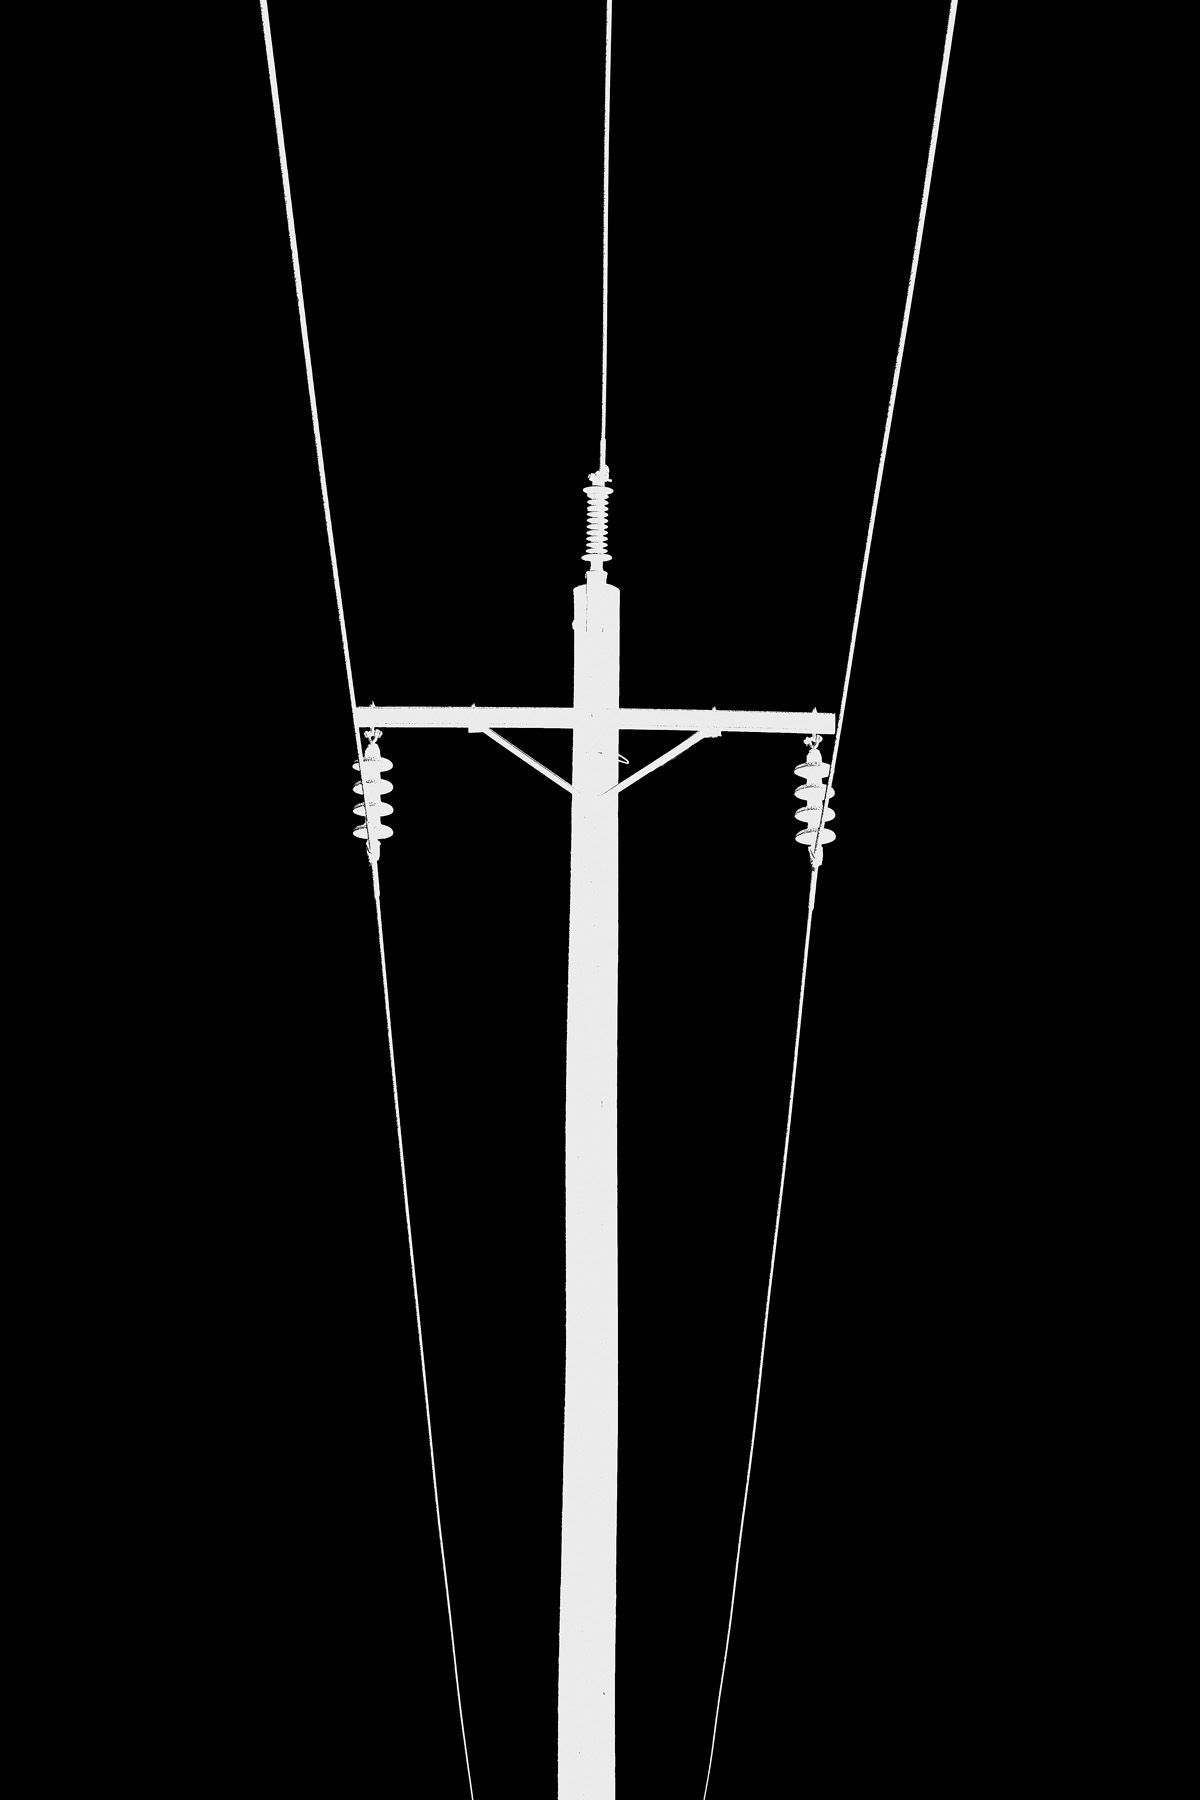 Scratchboard style abstraction of a transmission tower